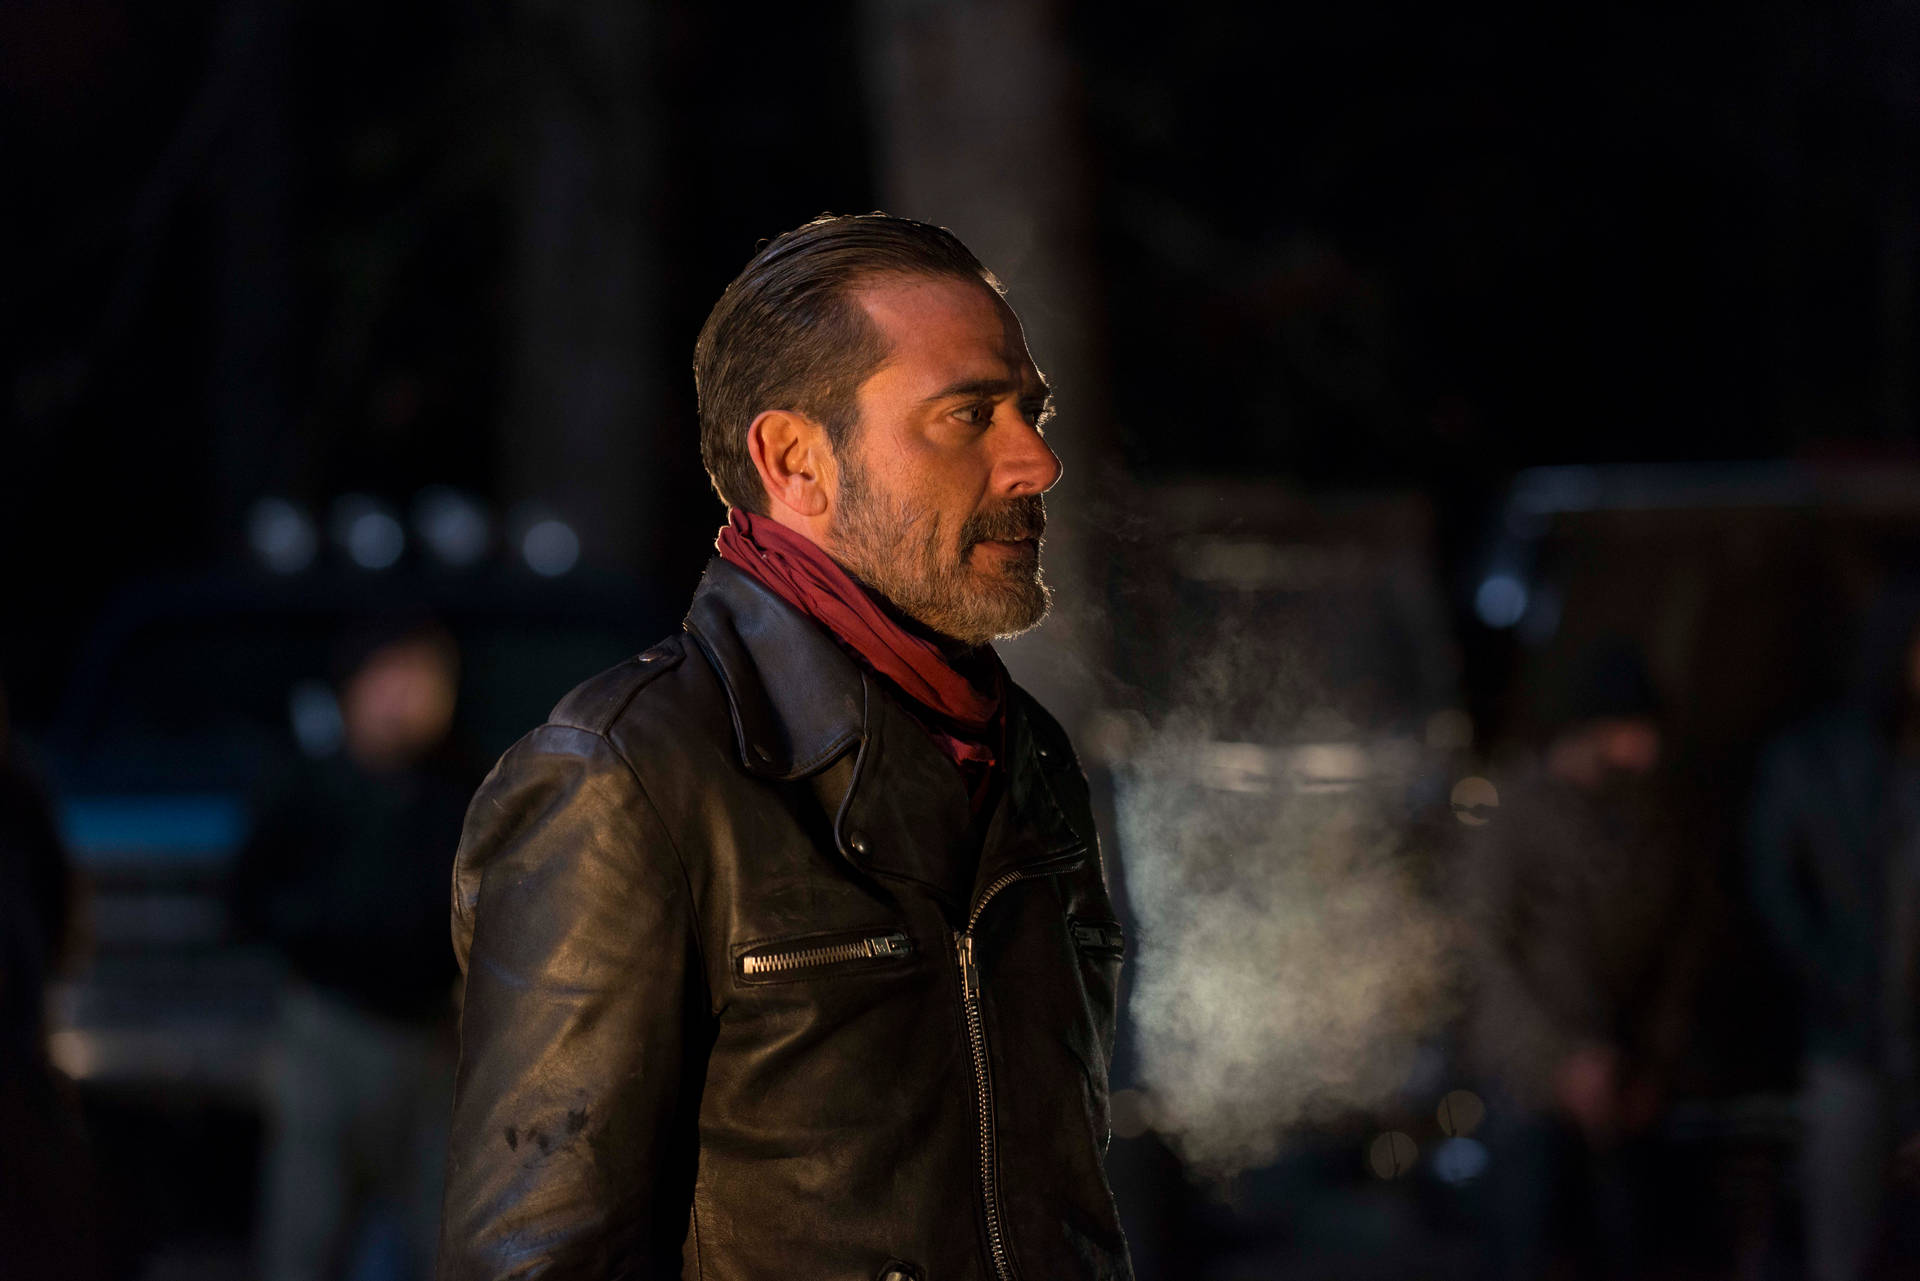 Negan During A Cold Night Wallpaper